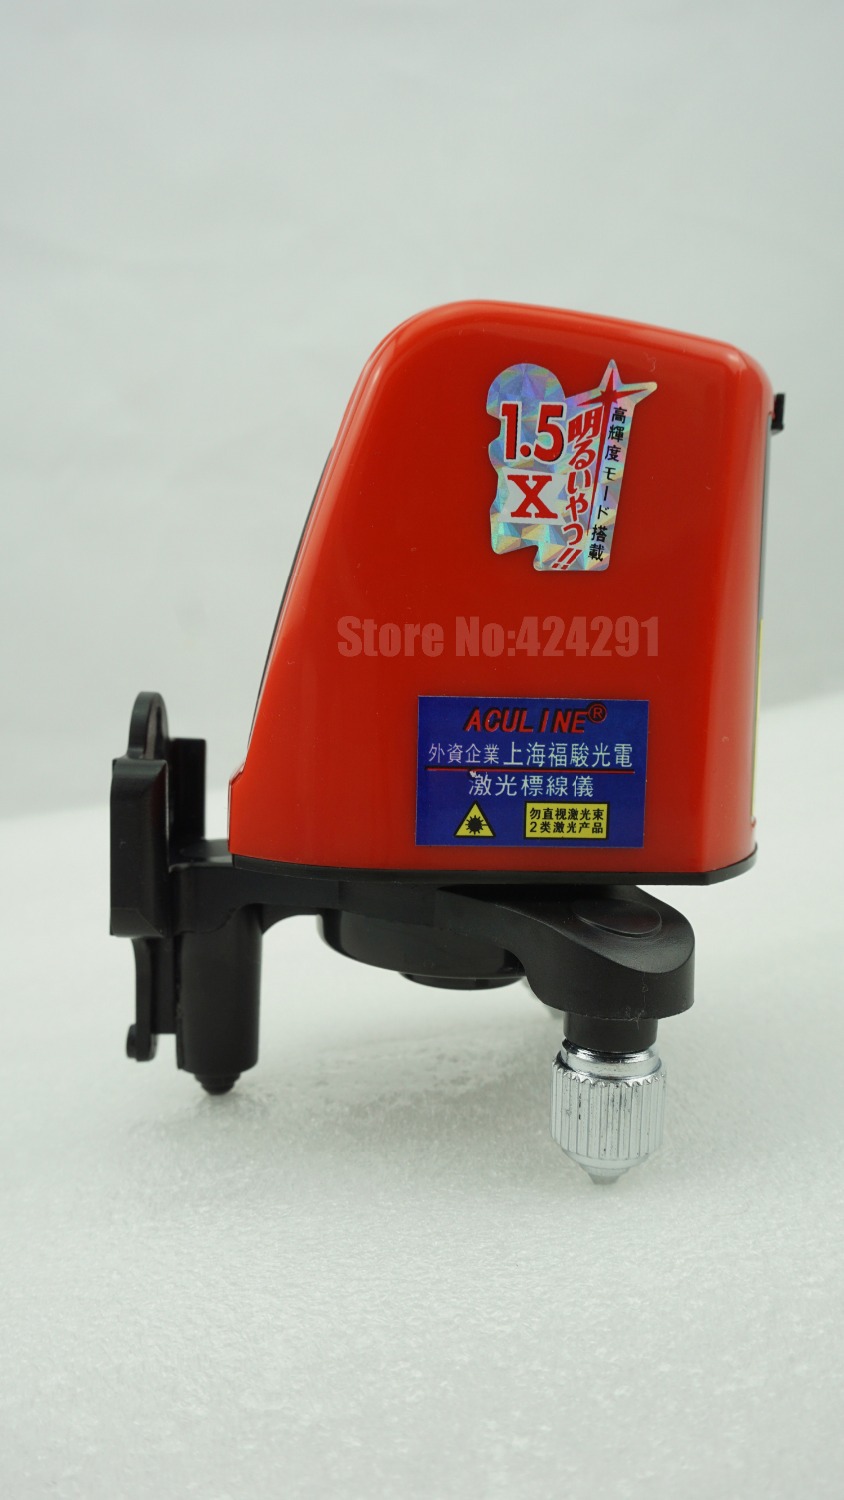 Freeshipping AK435 360degree self leveling Cross Laser Level 1V1H Red 2 line 1 point HOT SALE